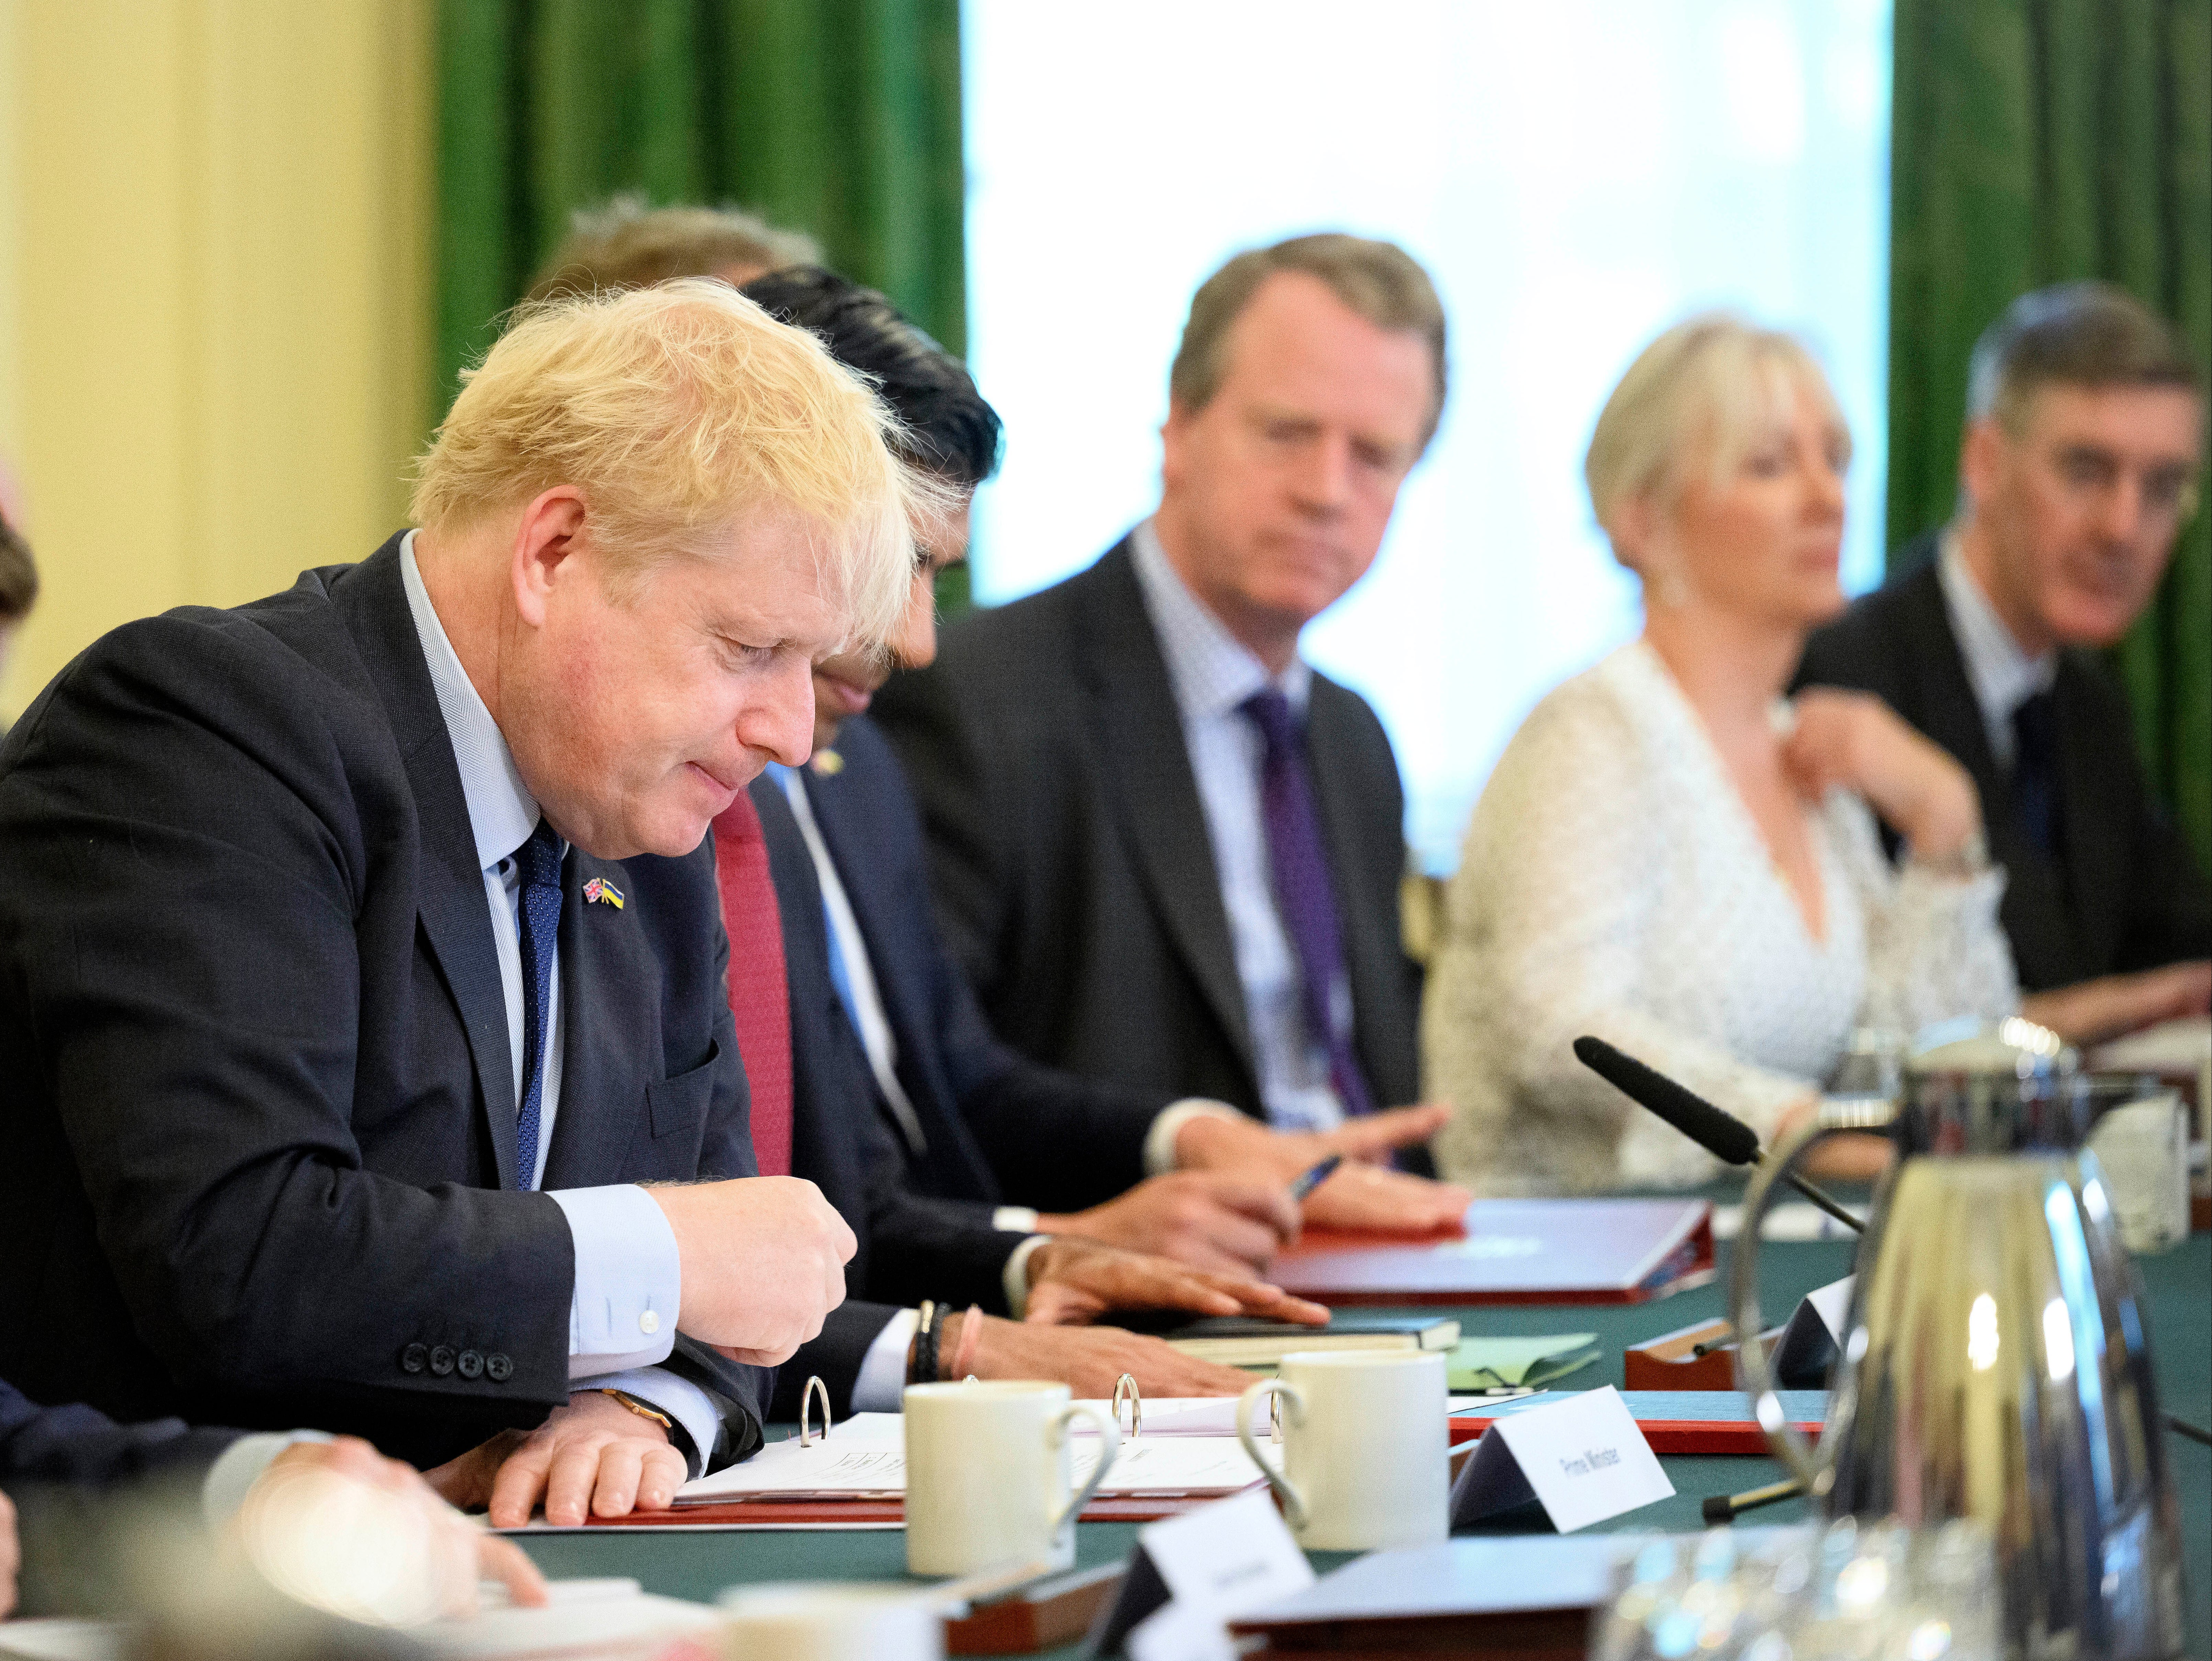 Boris Johnson, pictured at Tuesday’s cabinet meeting, could reshuffle his ministers